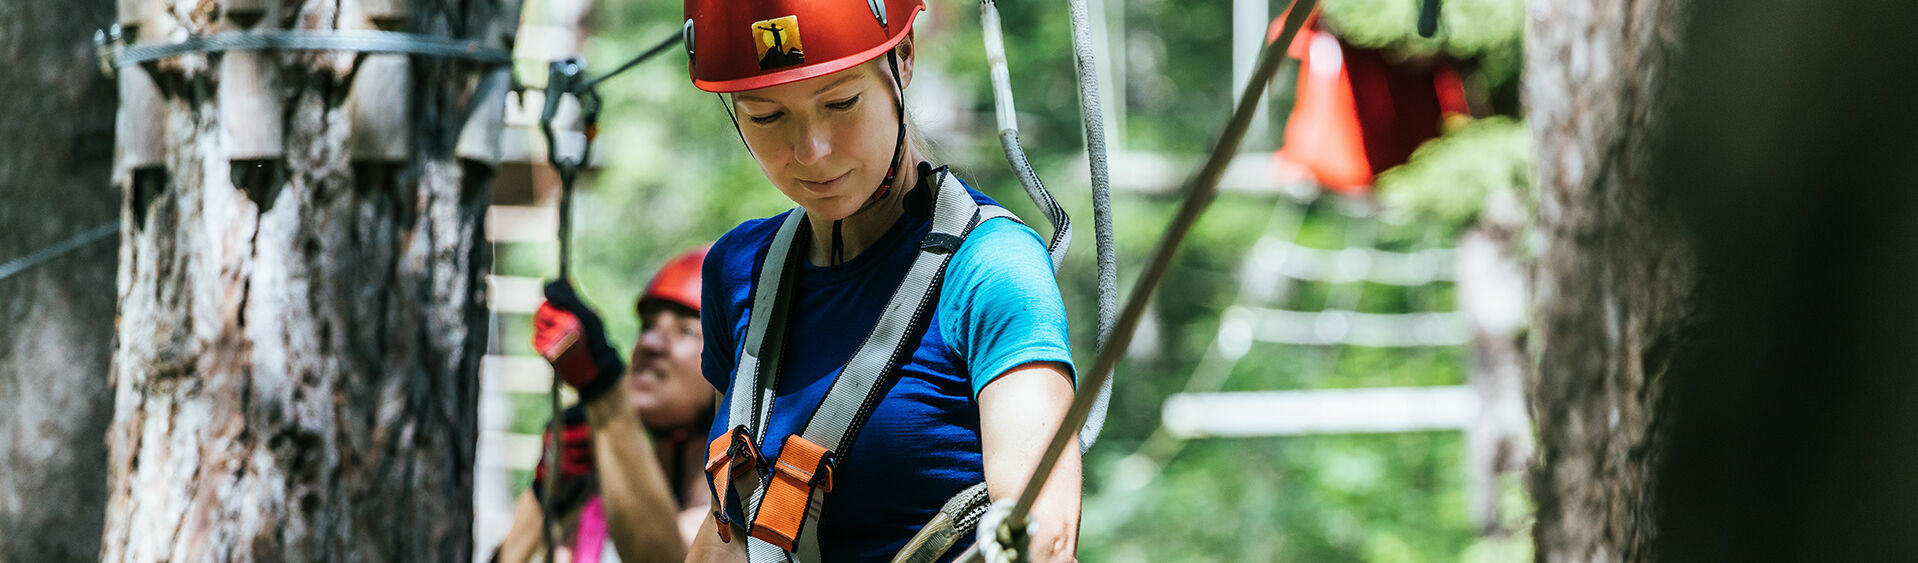 The forest high ropes course at the Adventure Park Achensee in Achenkirch offers climbing adventures for all ages. 